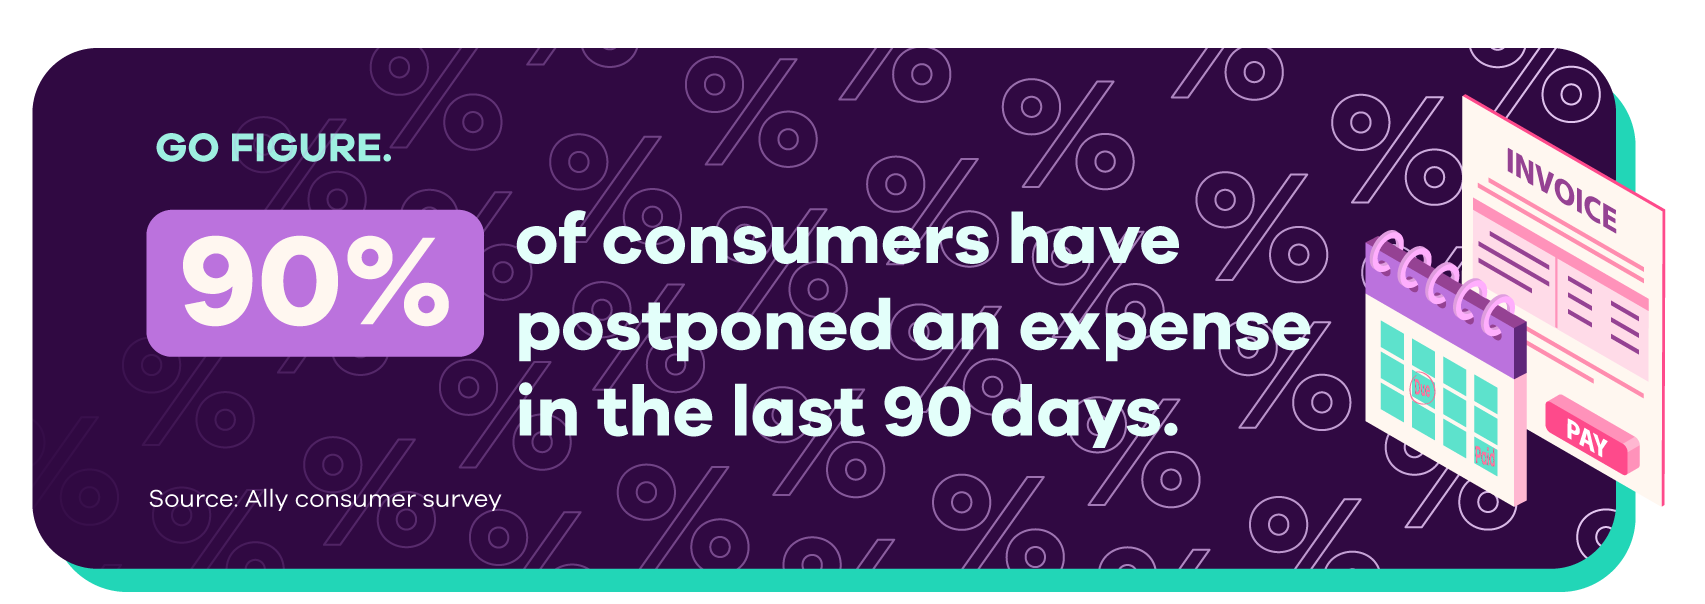 Illustration of a calendar and an electronic invoice with text: 90% of consumers have postponed an expense in the last 90 days. Source: Ally consumer survey.